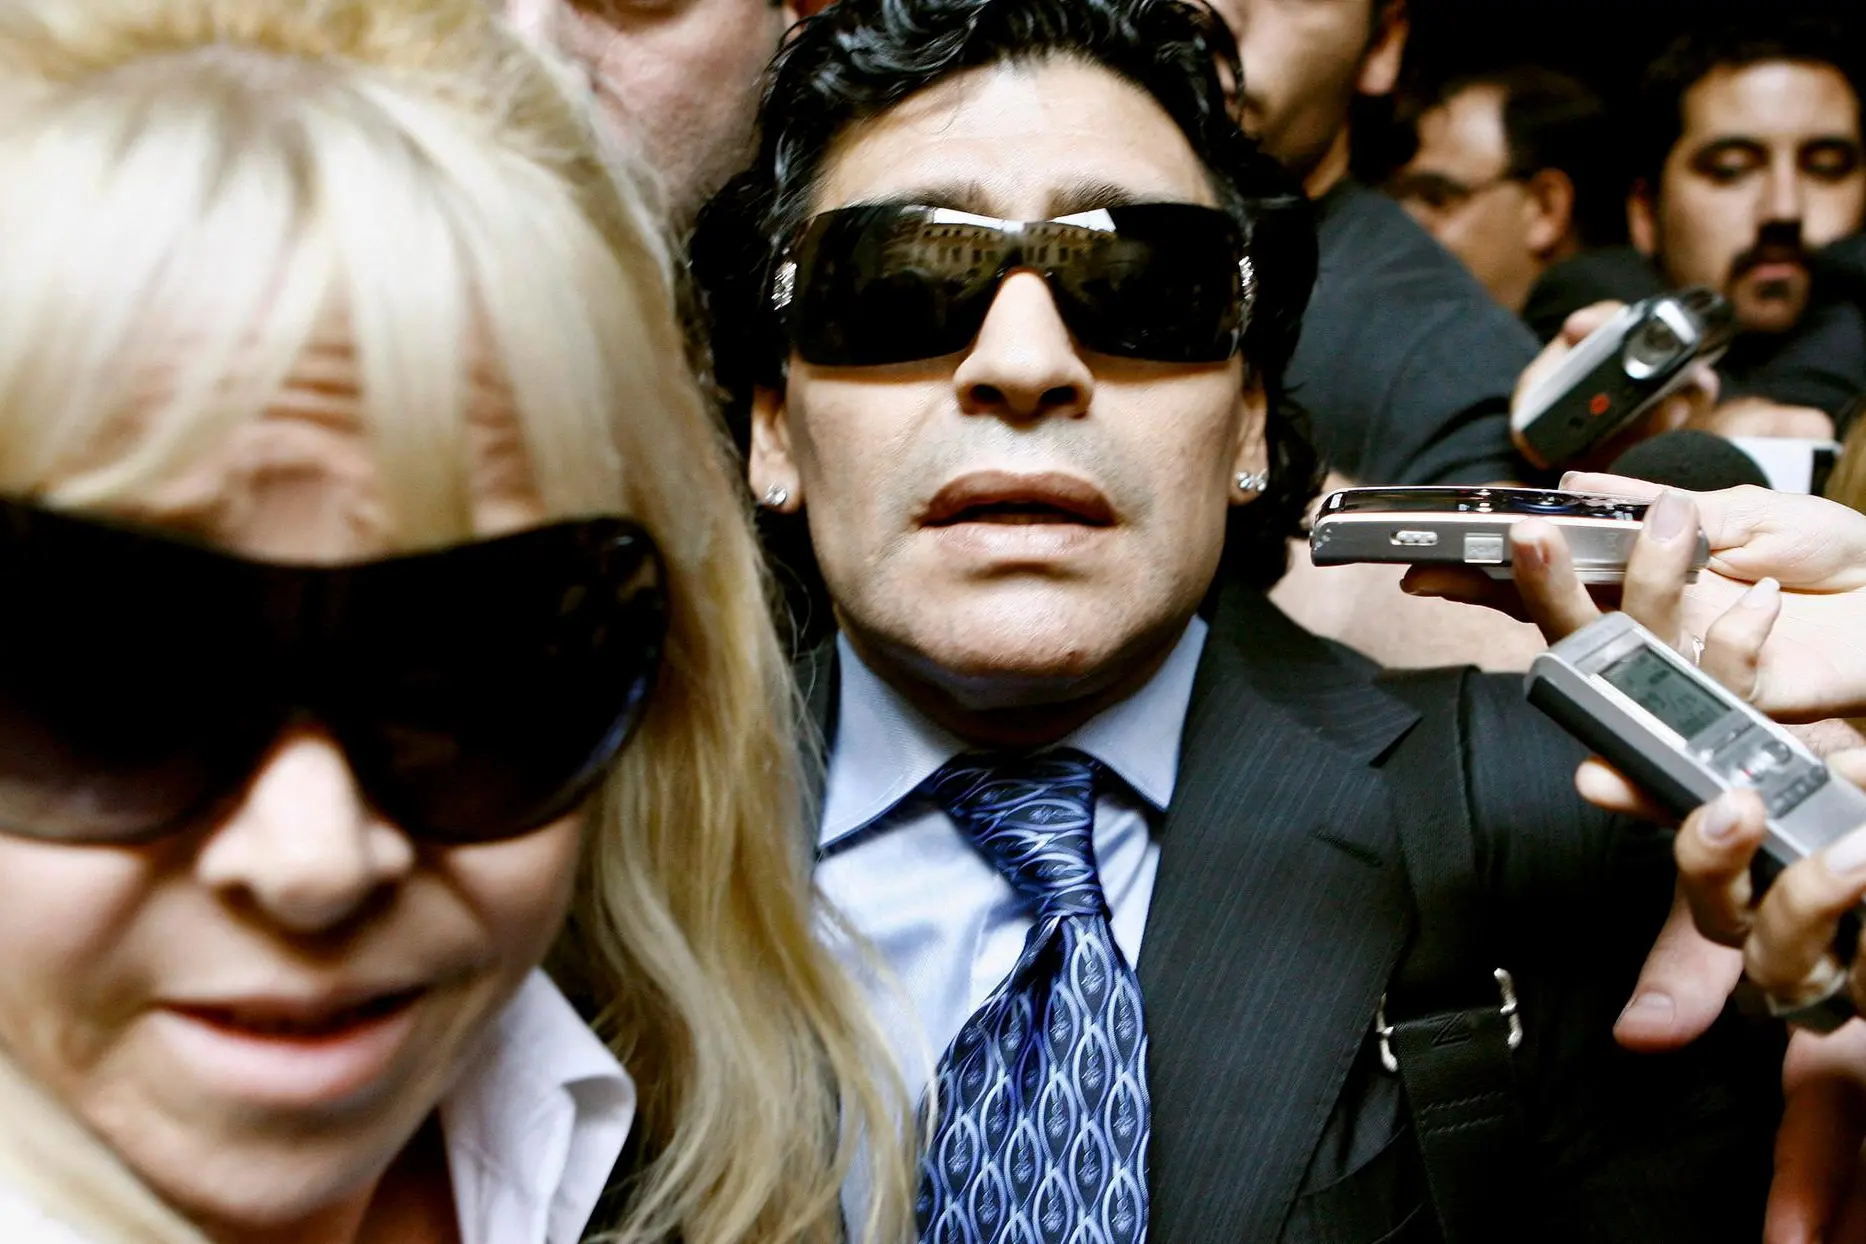 epa08841732 (FILE) - Argentinean soccer legend Diego Maradona (C) and his ex-wife Claudia Villafane (L) leave a court building in Buenos Aires, Argentina, 23 April 2008, where he attended a conciliation audience with former manager Guillermo Coppola (re-issued on 25 November 2020). Diego Maradona has died after a heart attack, media reports claimed on 25 November 2020. The Argentine soccer great was among the best players ever and who led his country to the 1986 World Cup title before later struggling with cocaine use and obesity. He was 60. EPA/LEO LA VALLE